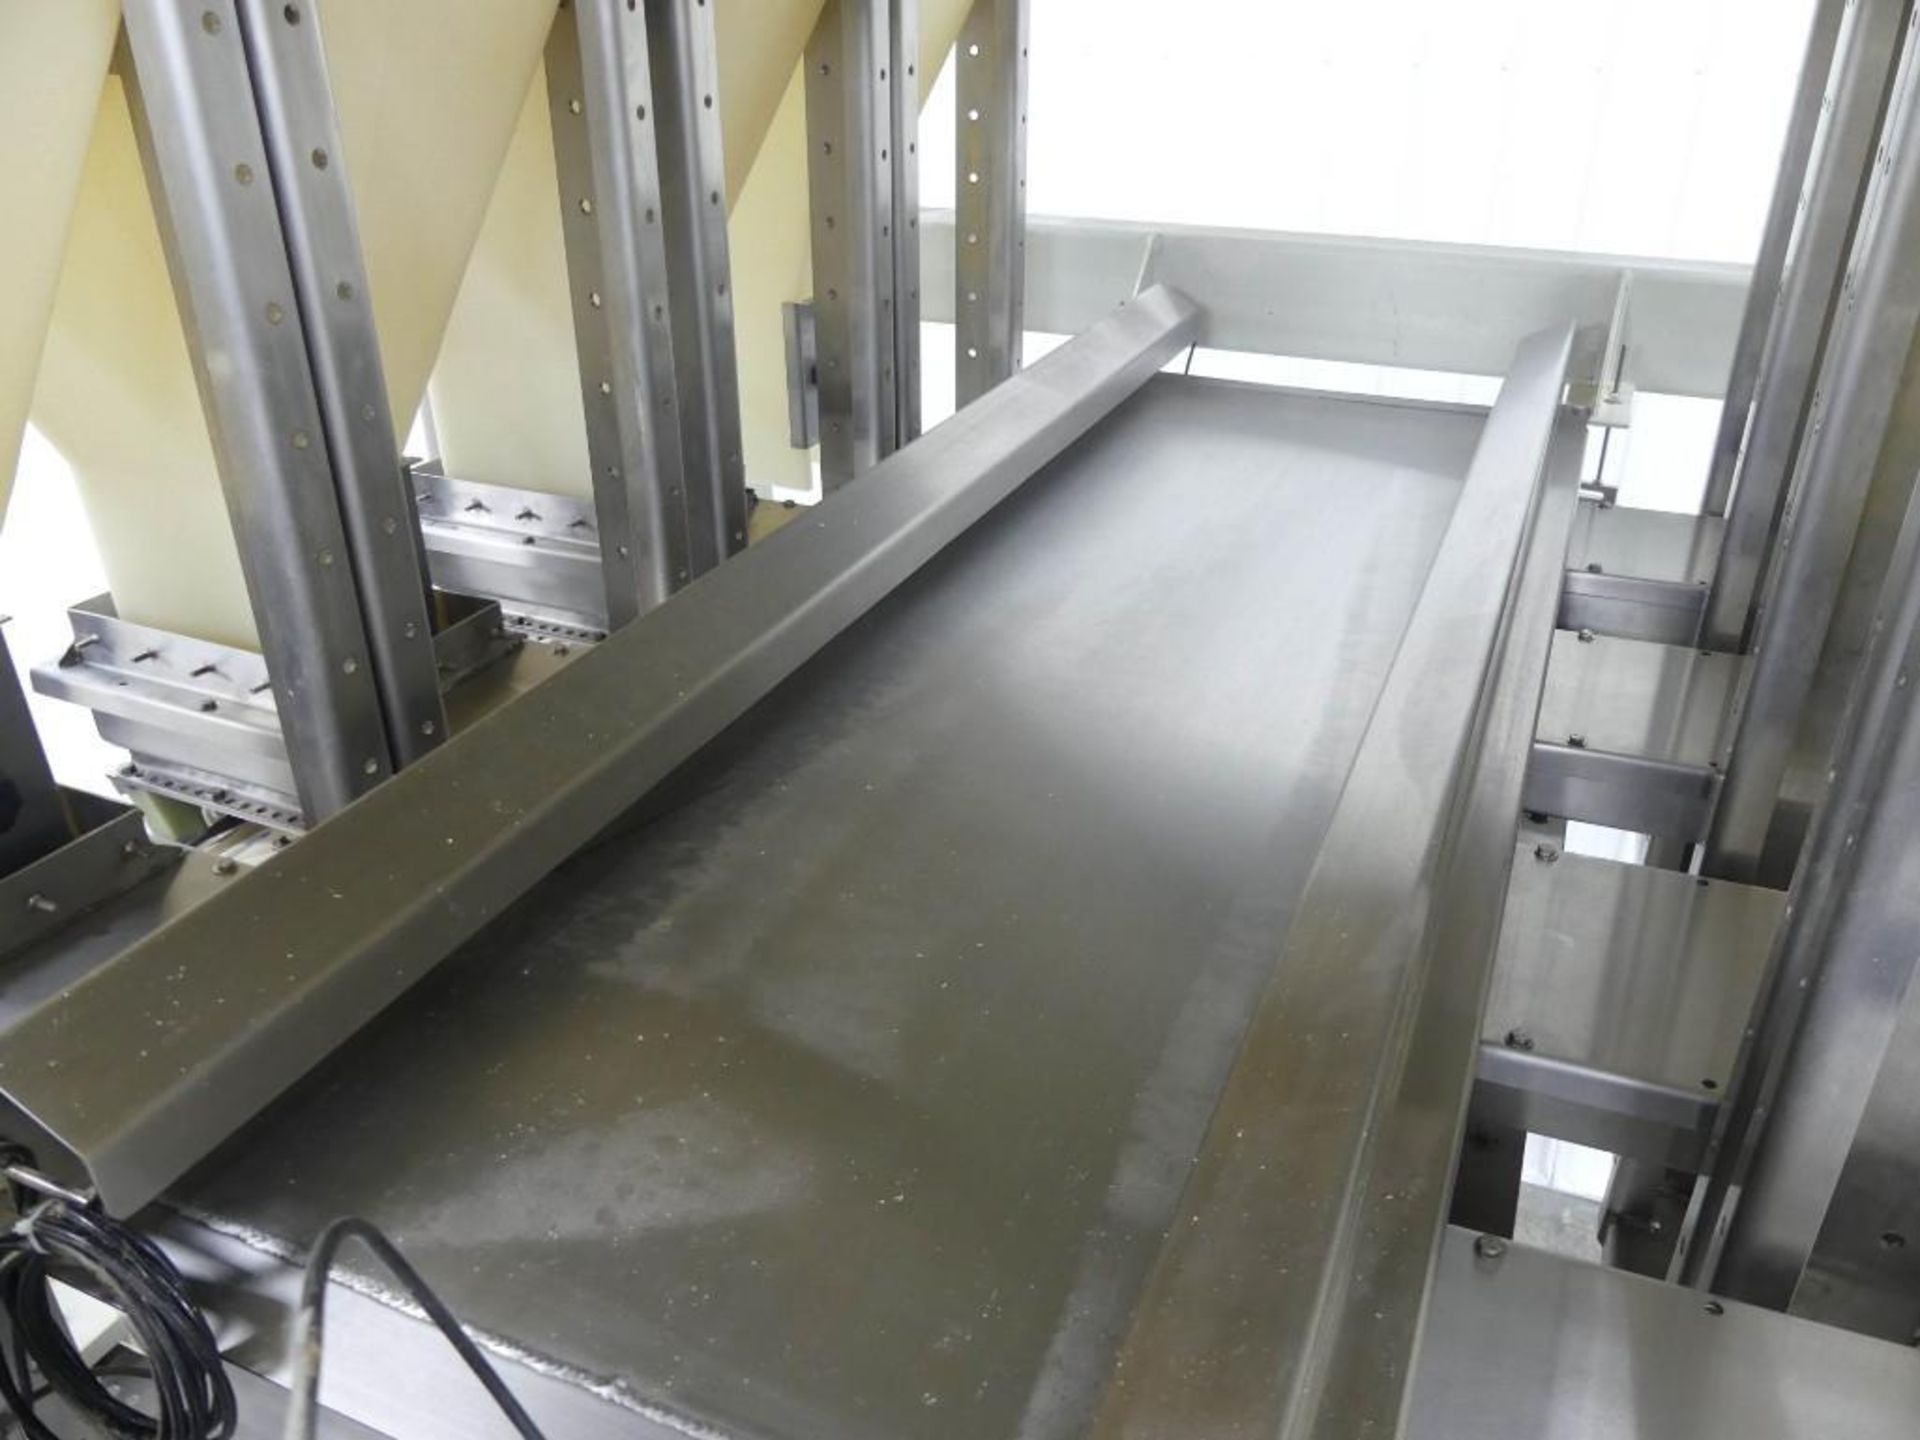 Rice Lake Weighing Systems Vertical Filler - Image 22 of 22